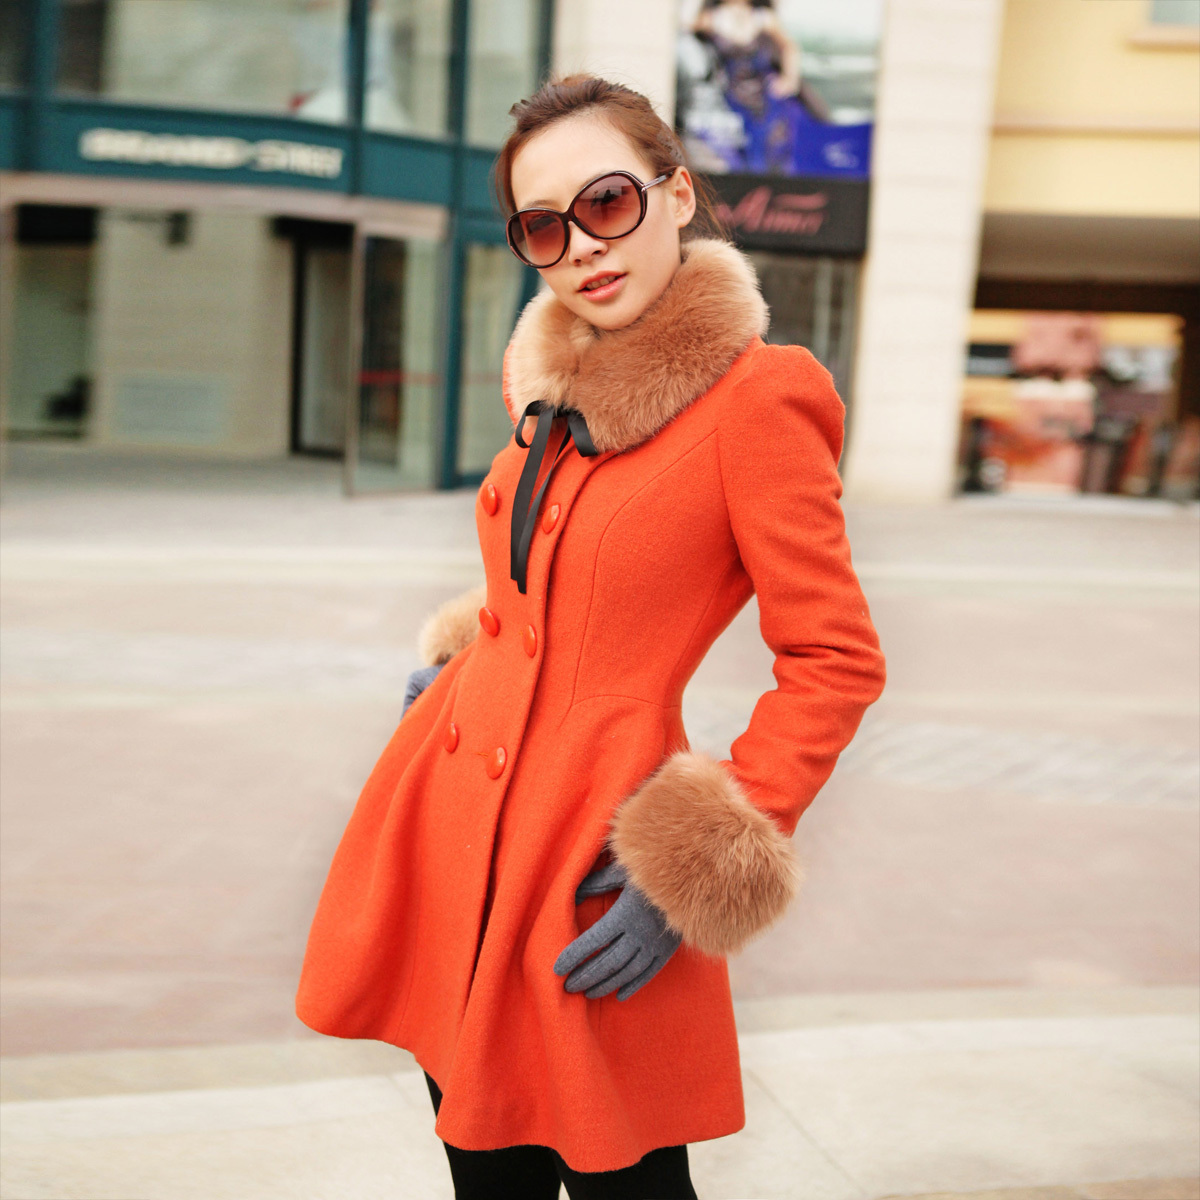 Free-shipping-2012-autumn-and-winter-women-s-fashion-casual-orange-double-Breasted-long-fur-collar.jpg